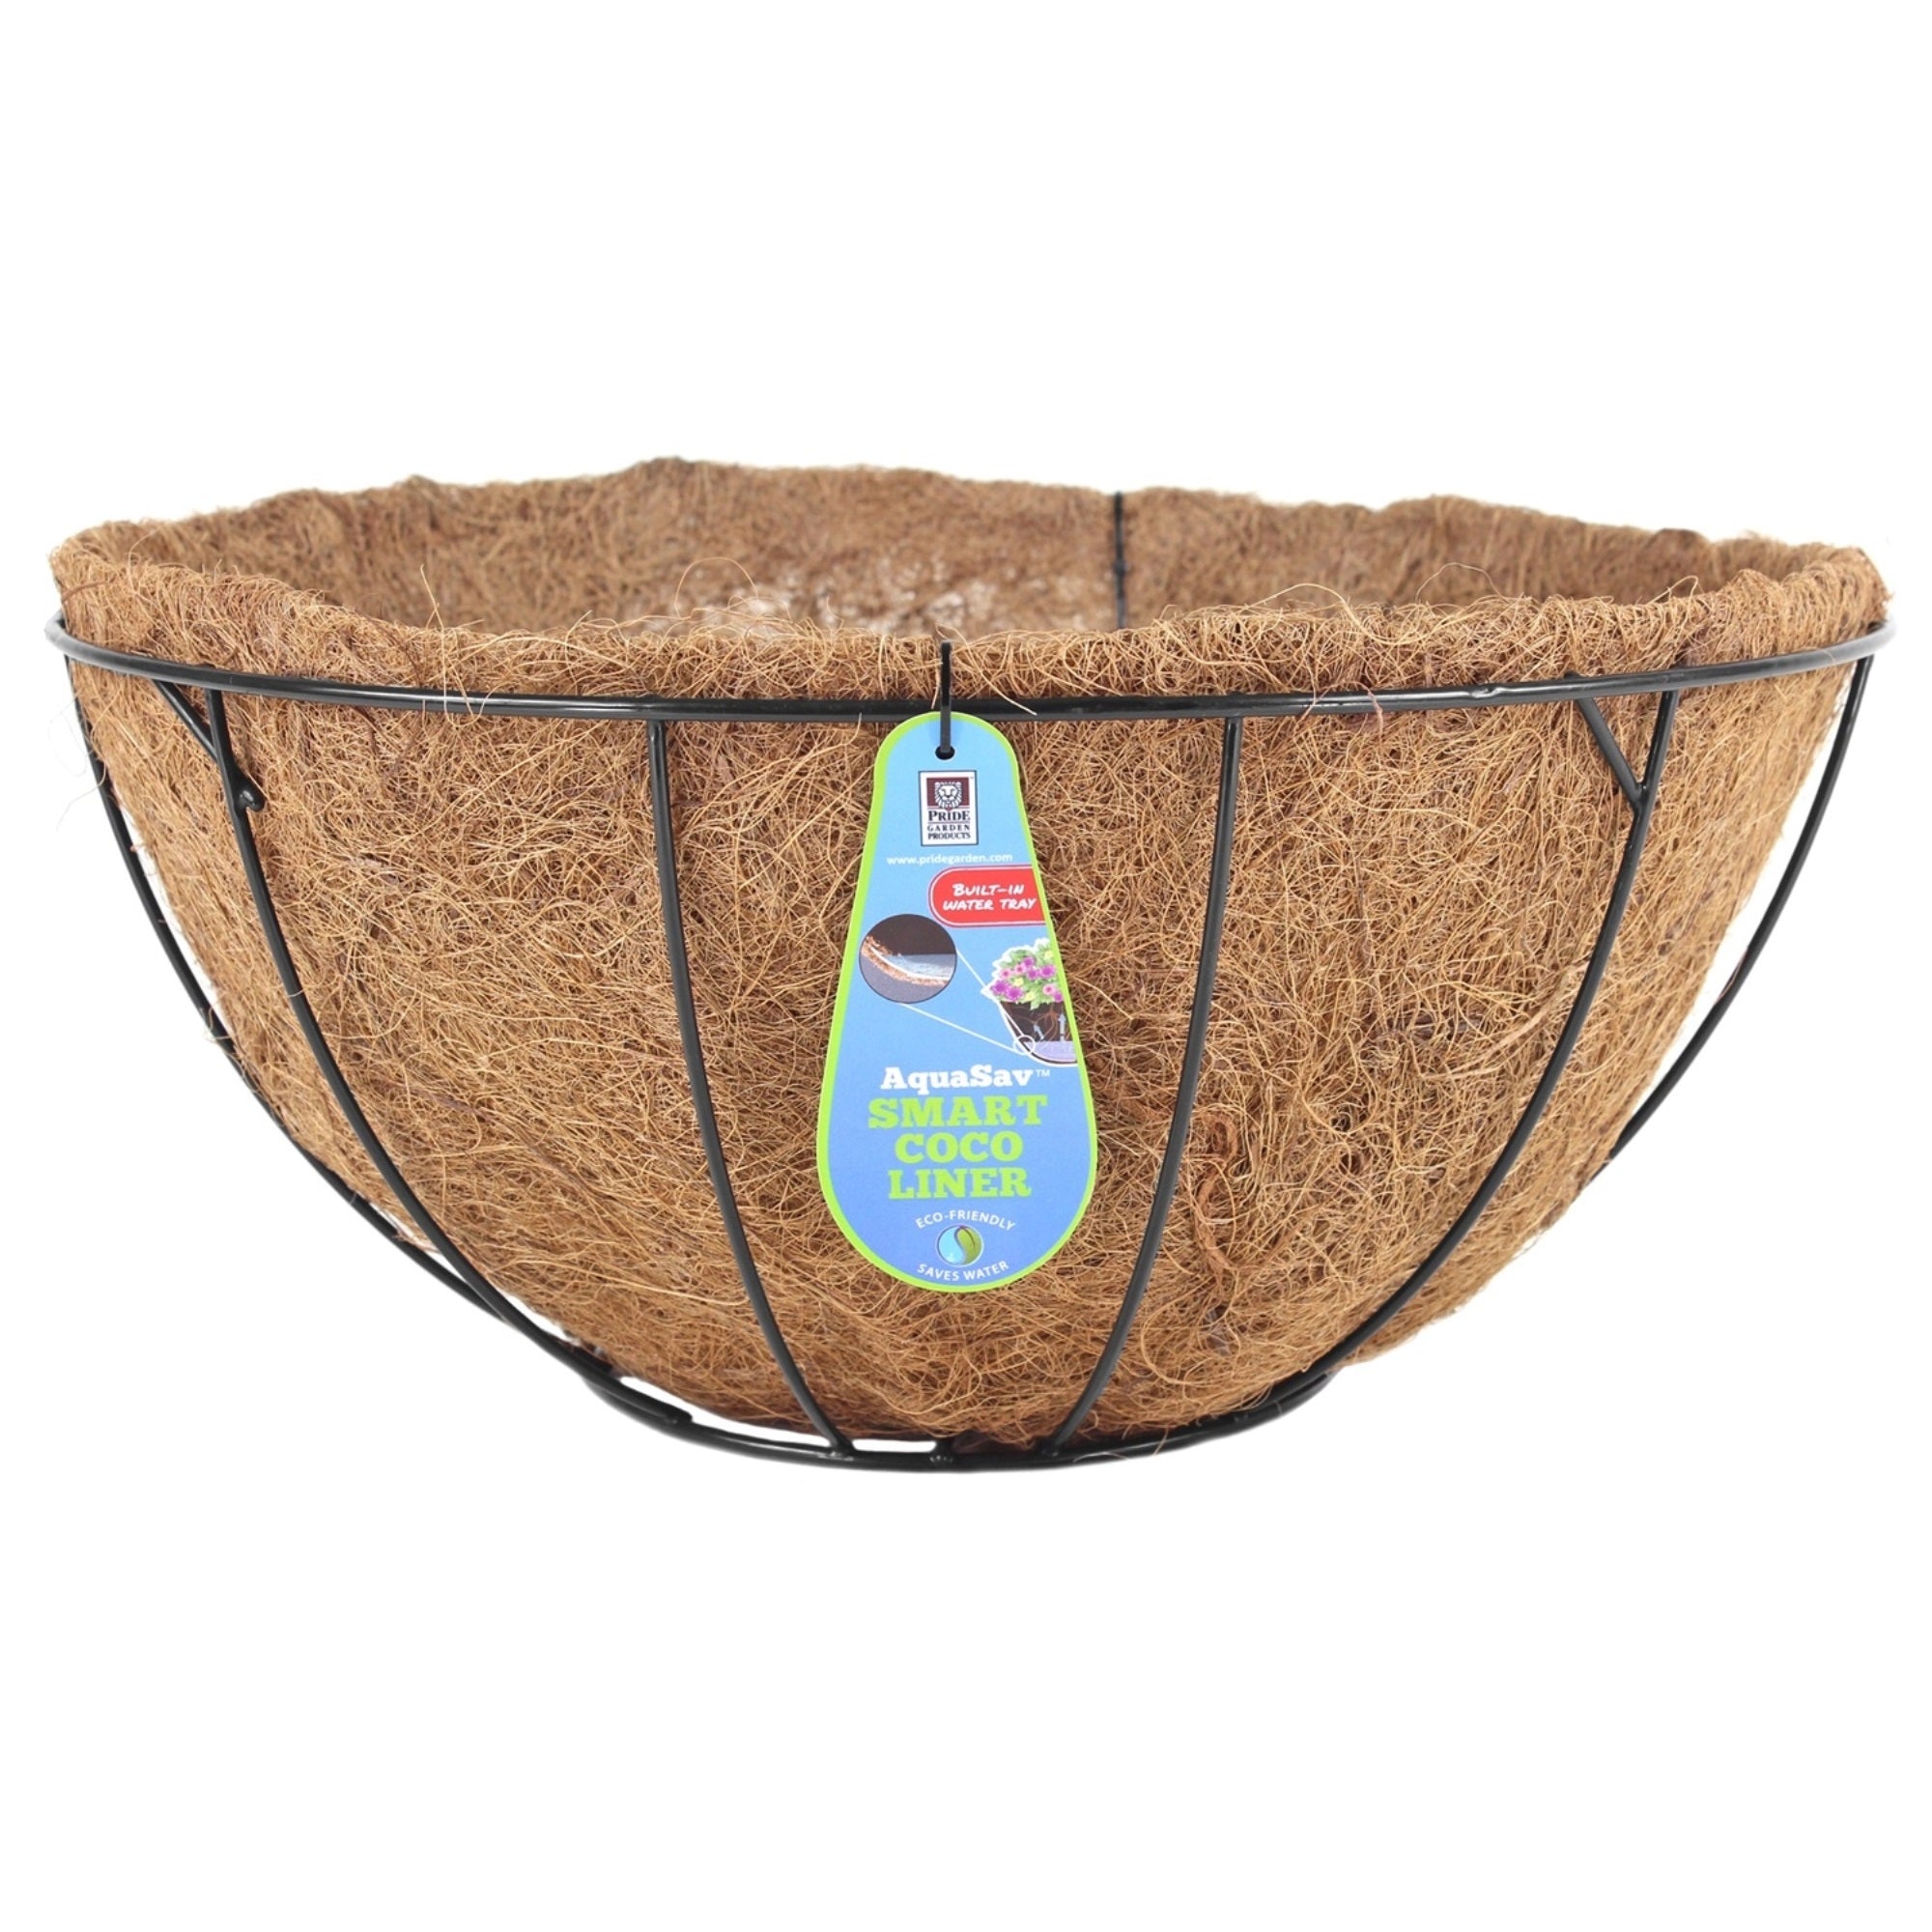 Pride Garden Products Grower Hanging Baskets with AquaSav Smart Coco Liner, 16